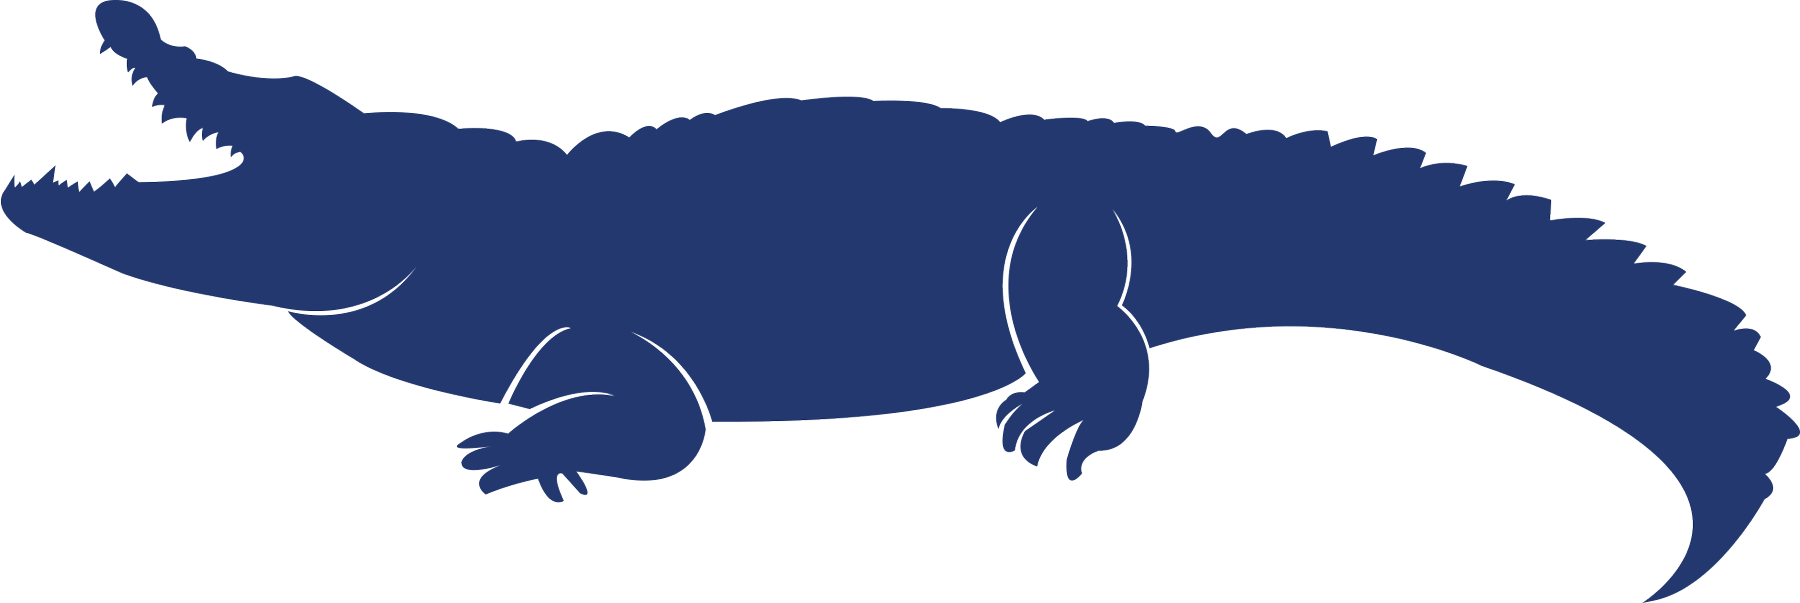 blue silhouette of an alligator